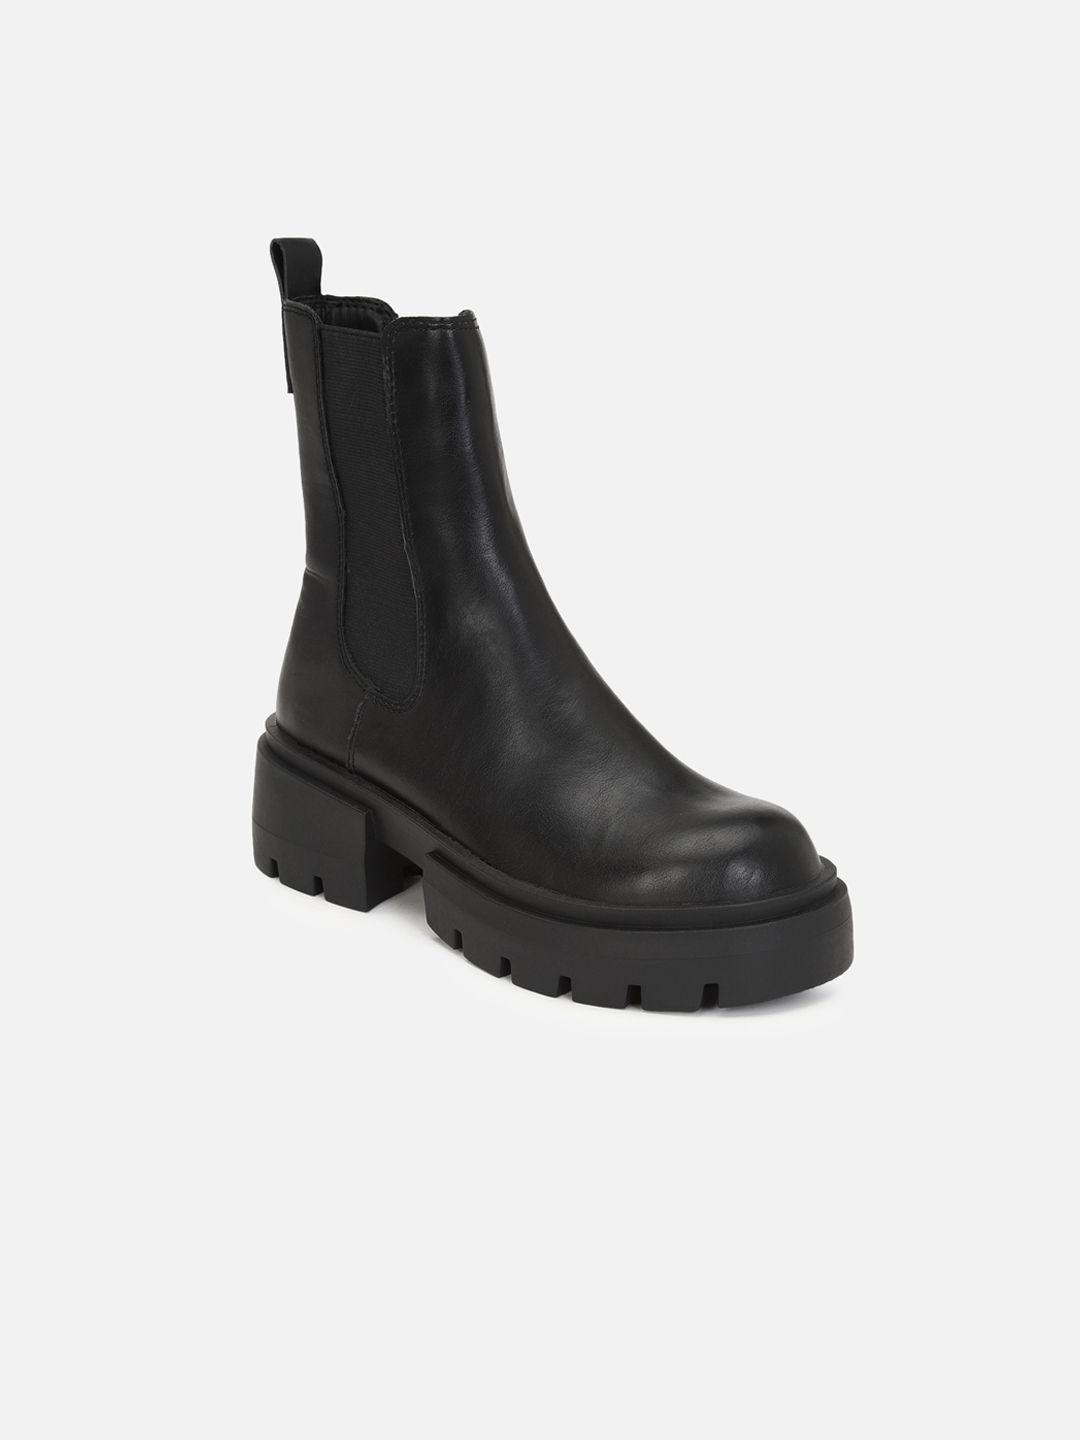 forever-21-women-black-solid-chelsea-boots